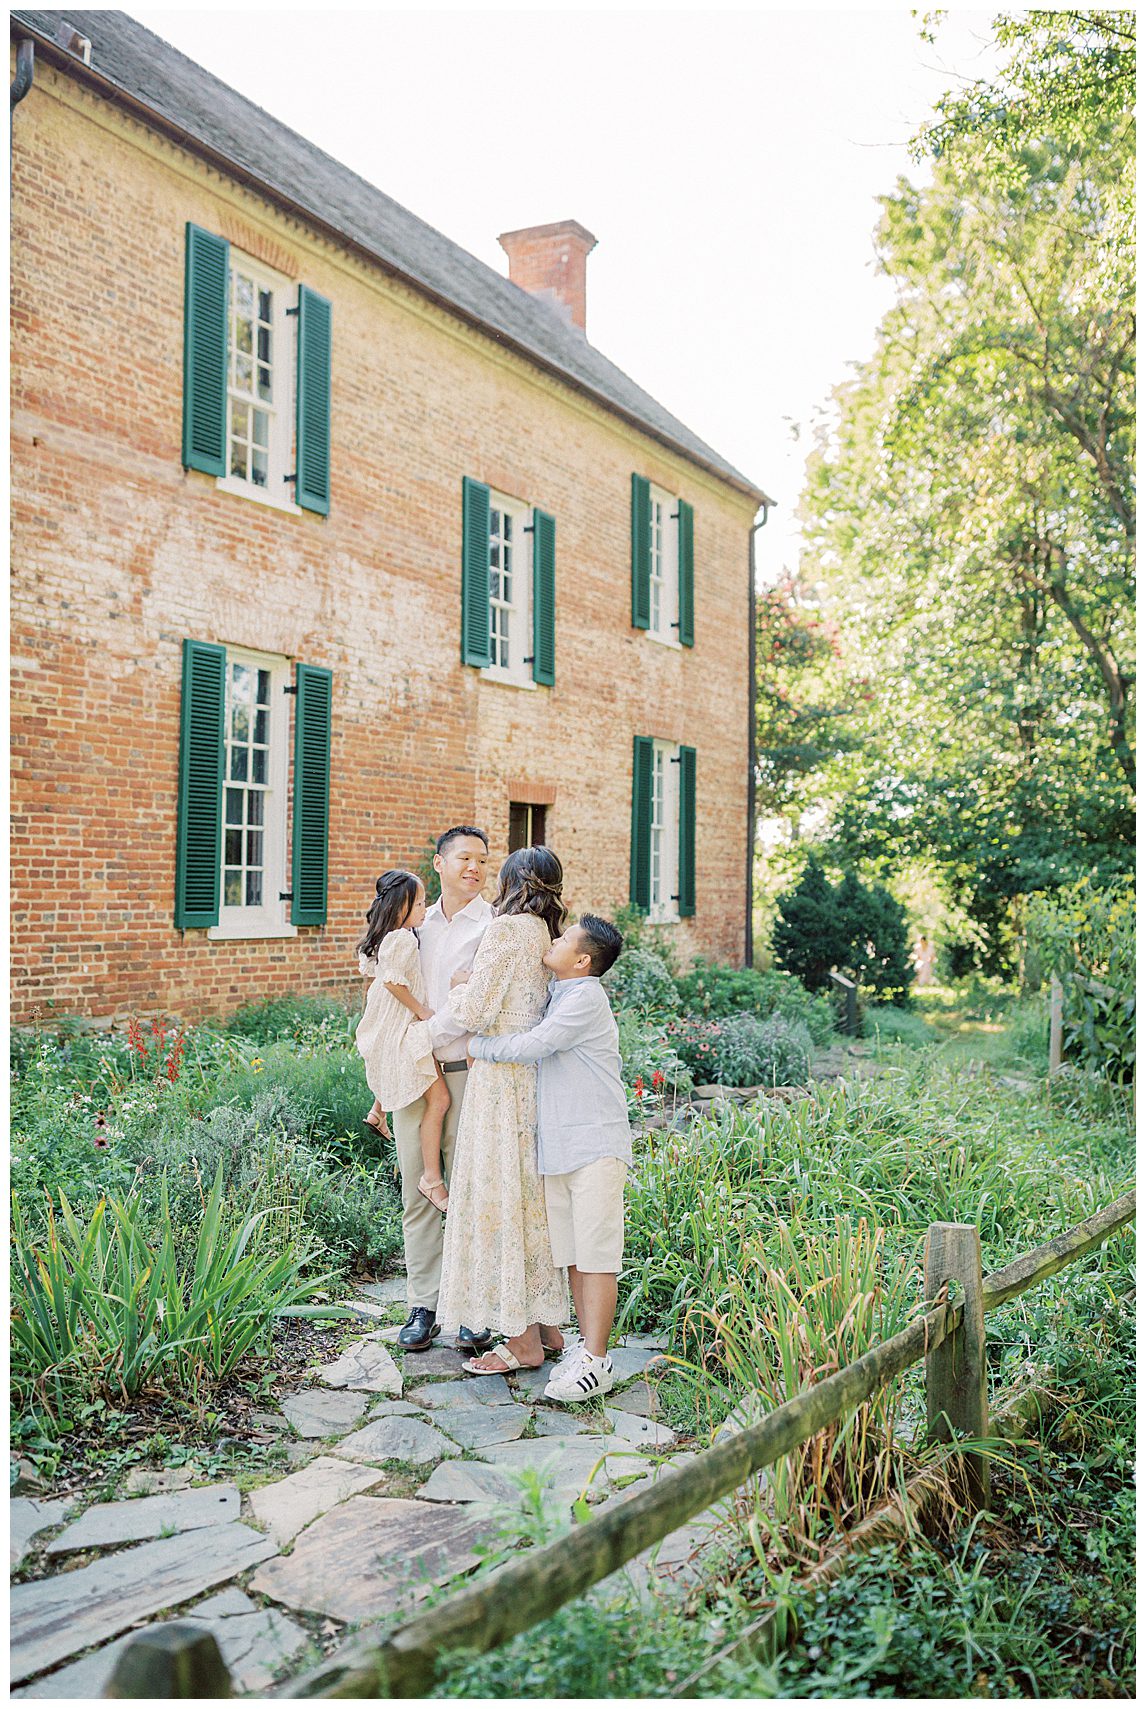 Family stands in front of brick house at Colvin Run Mill during their family photo session.